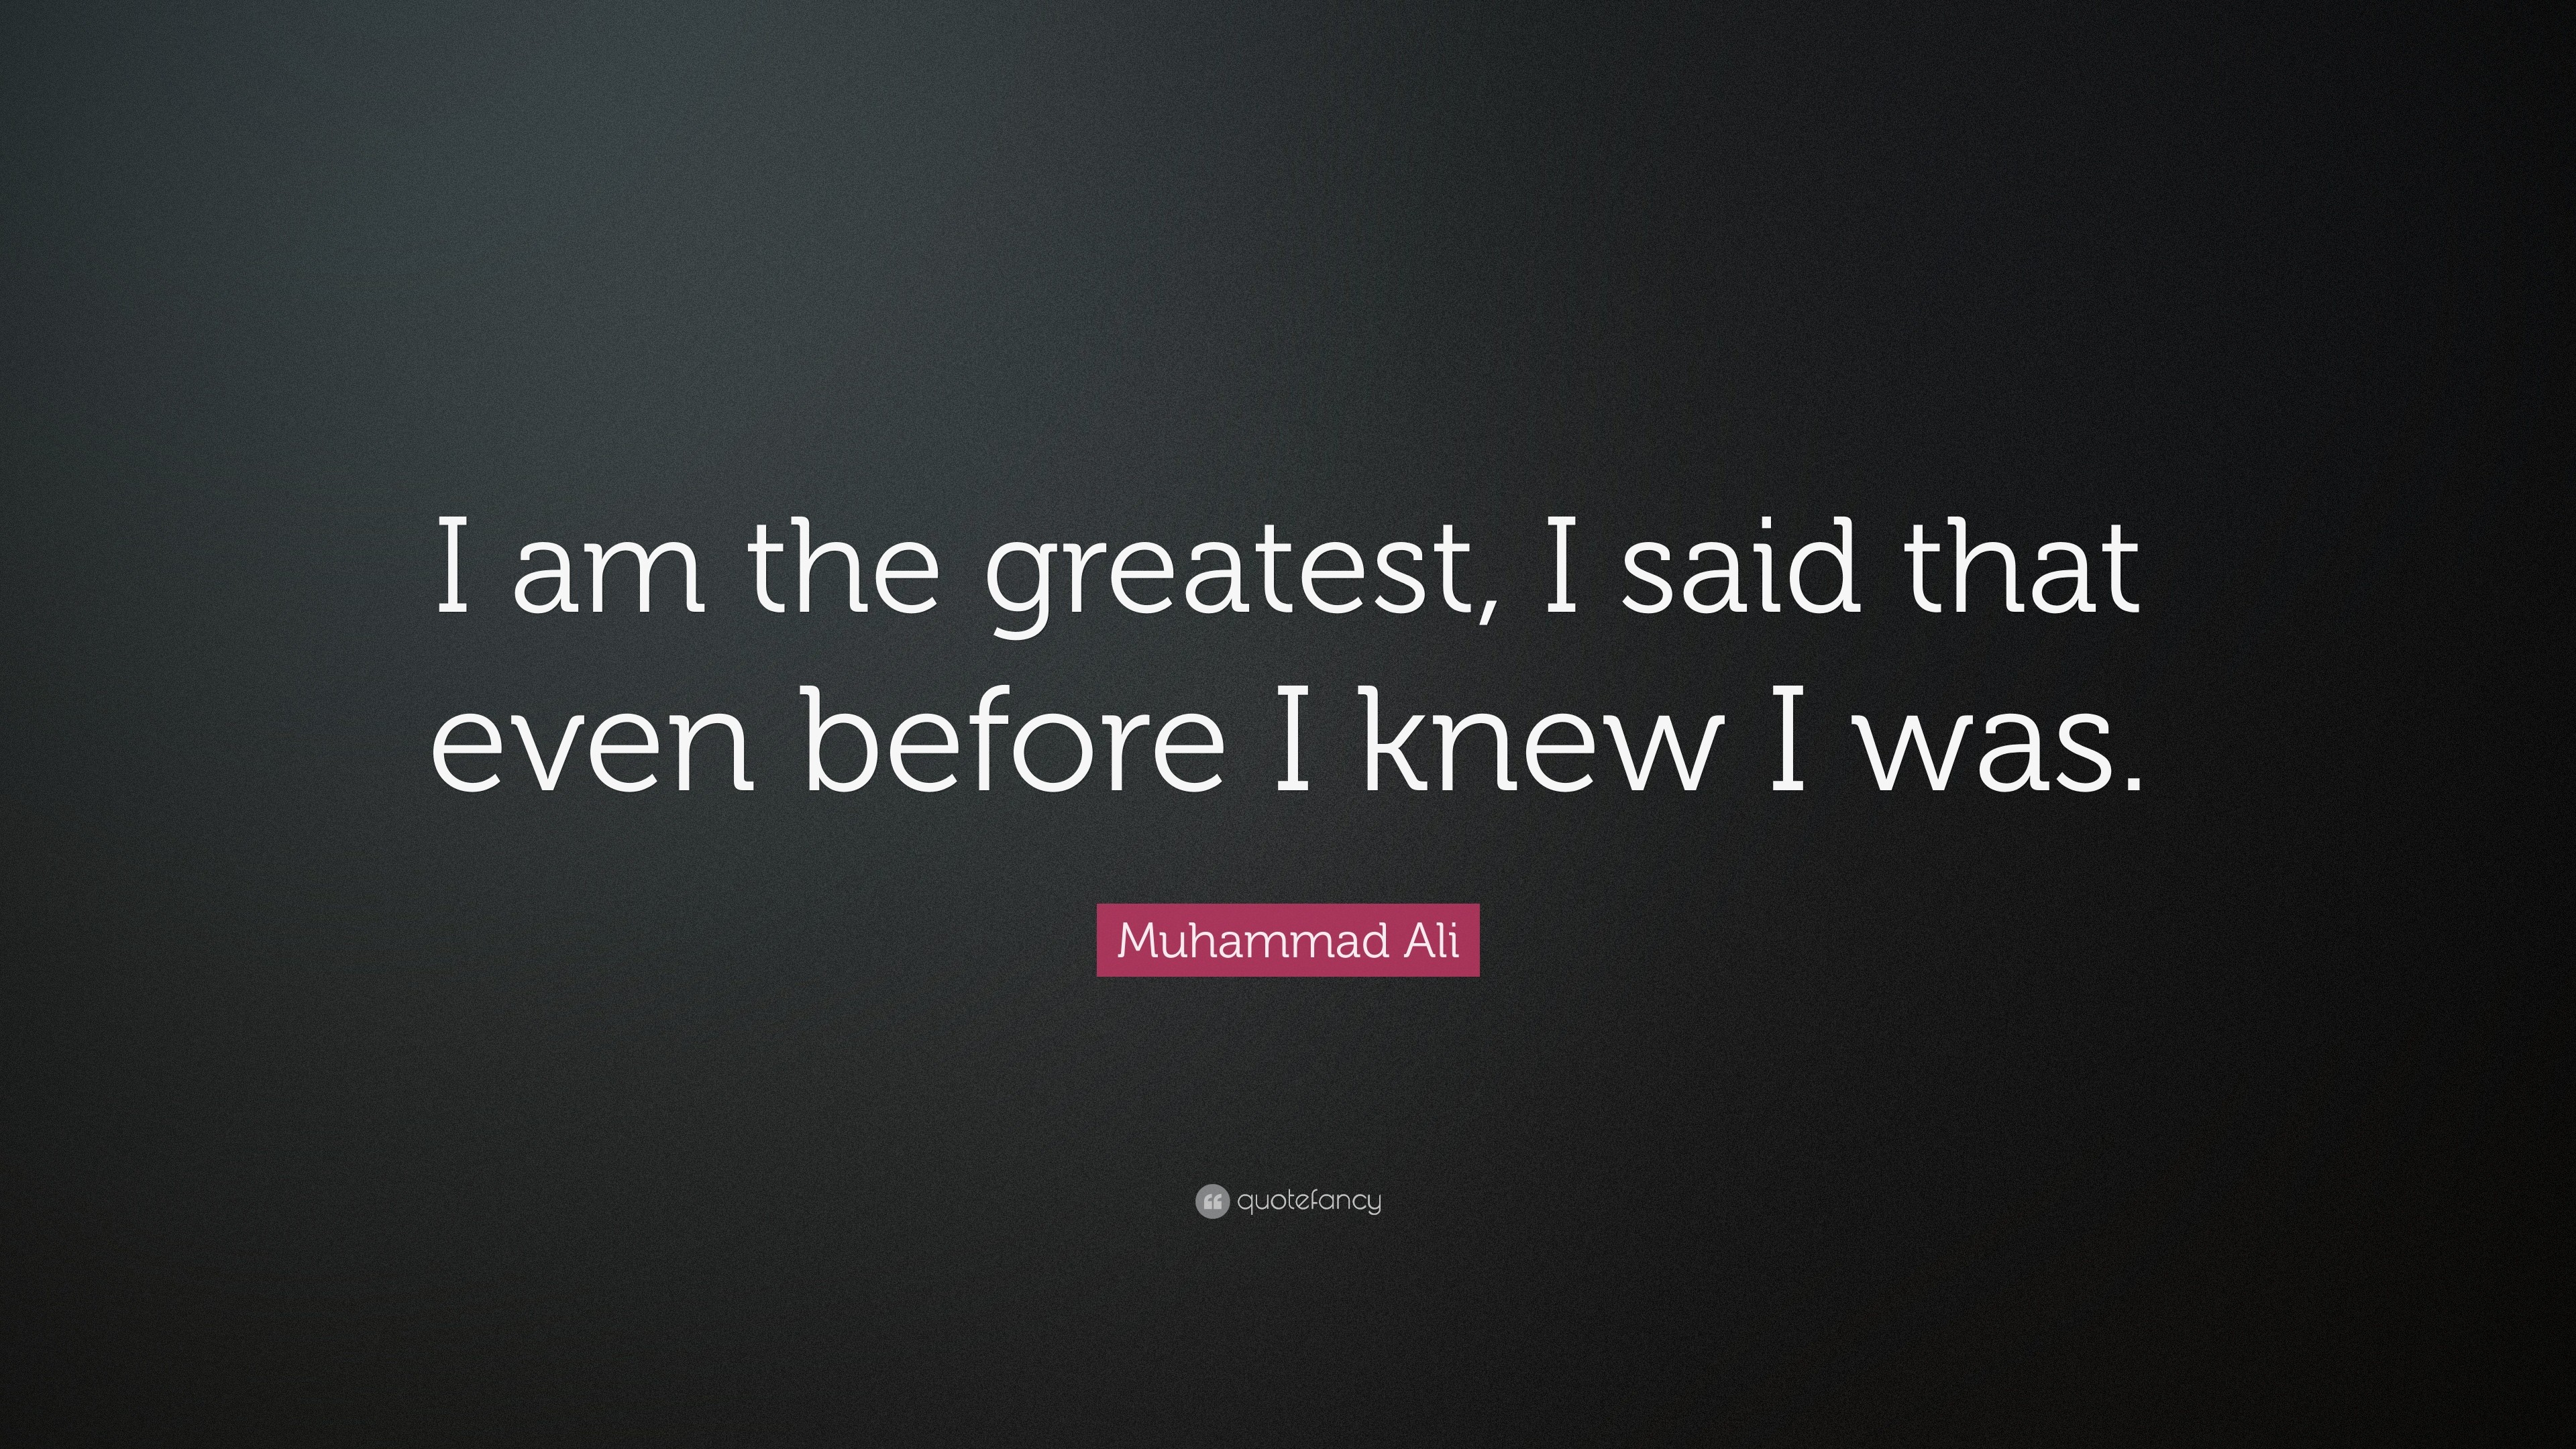 3840x2160 Positive Quotes: “I am the greatest, I said that even before I knew